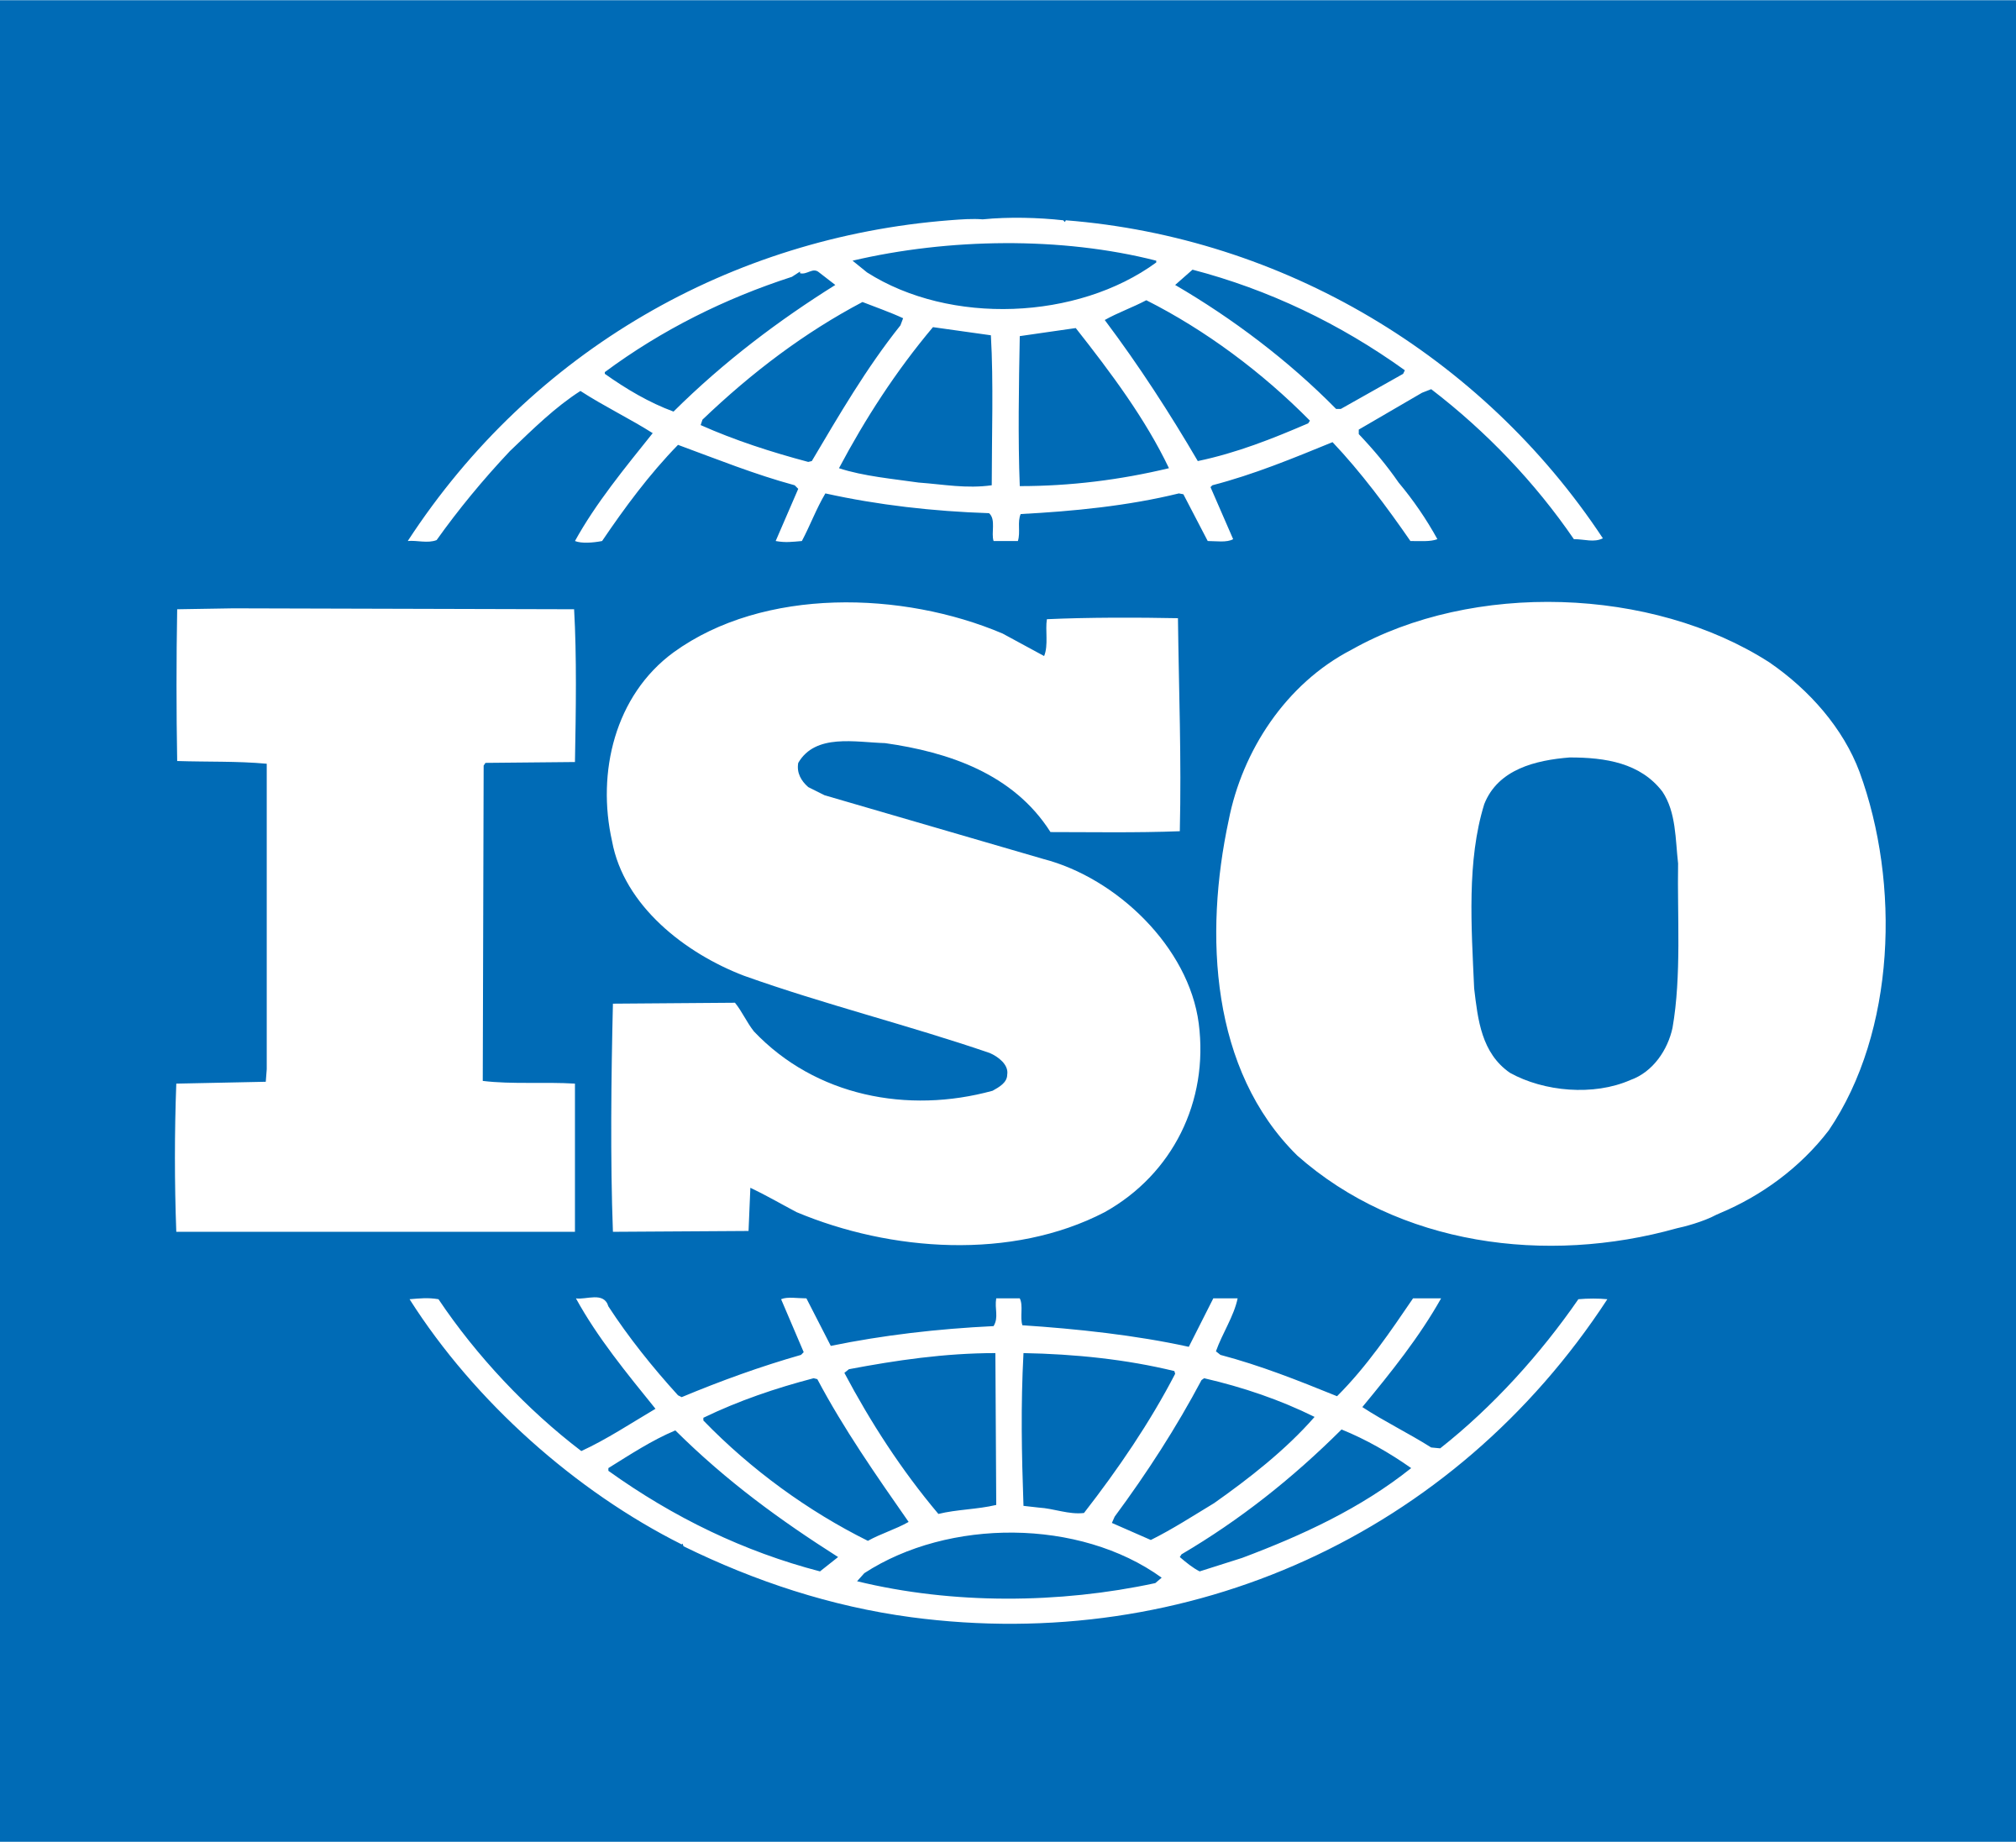 iso-31-logo-png-transparent.png